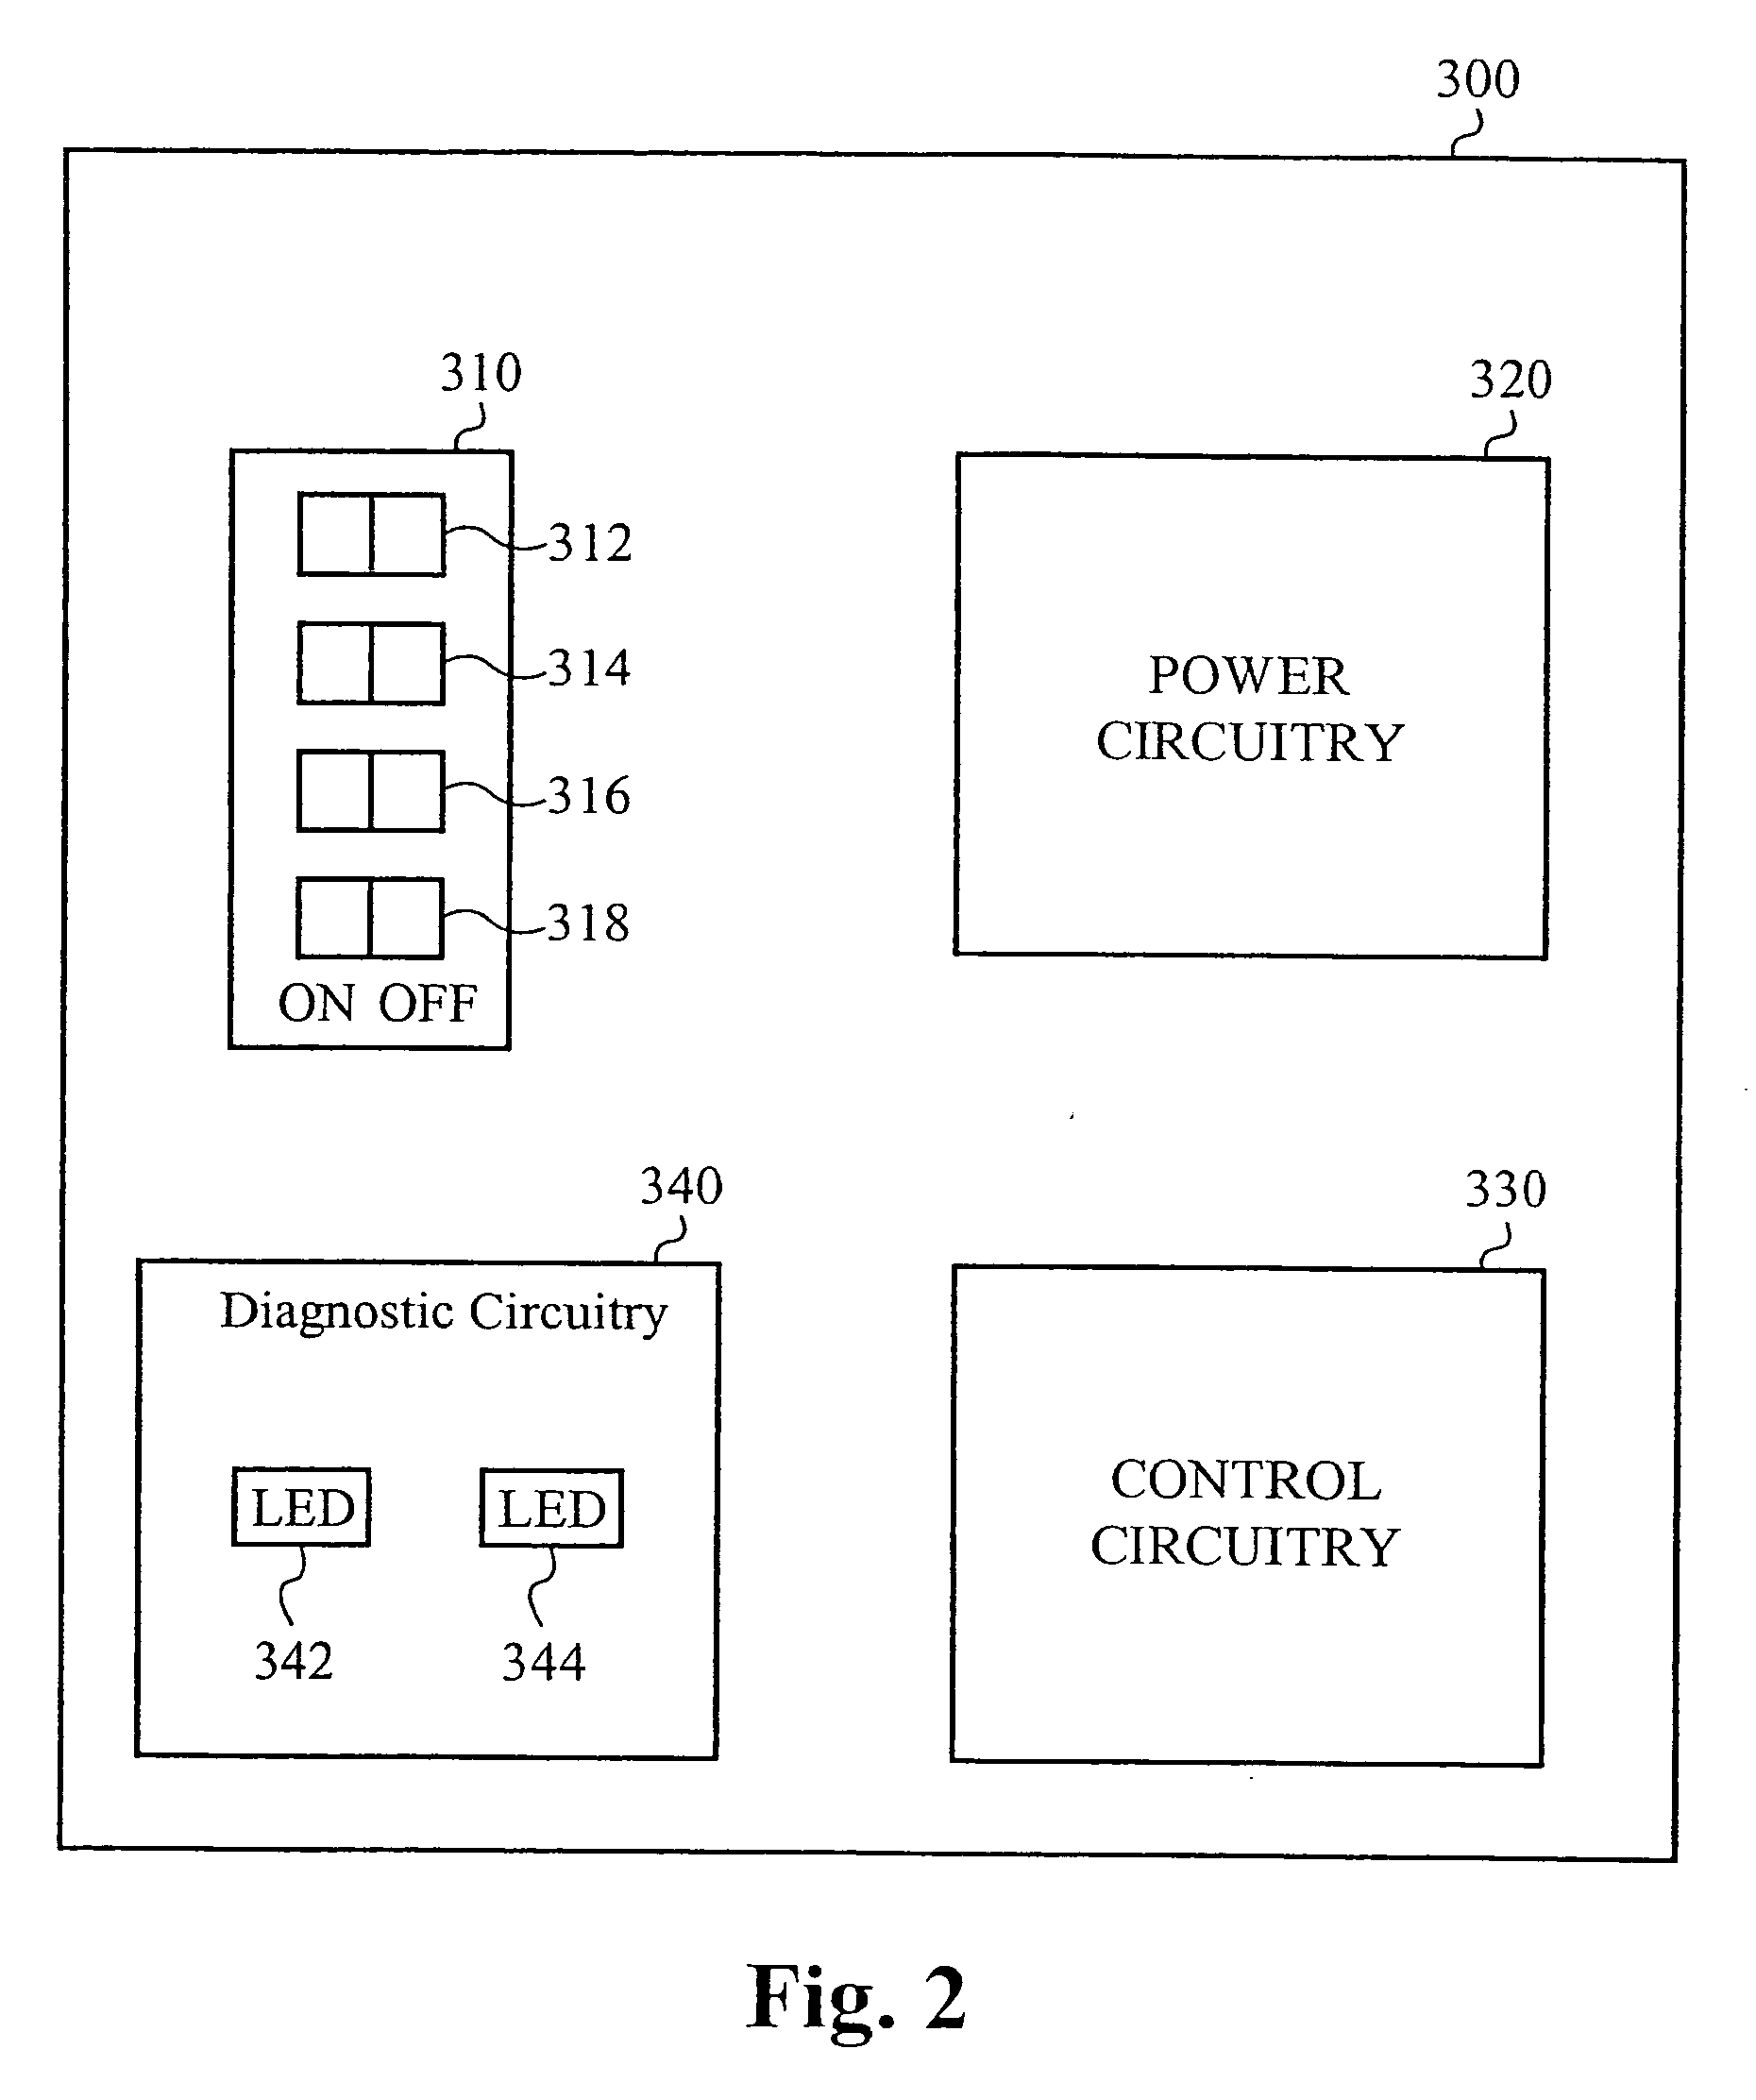 System and architecture for controlling lighting through a low-voltage bus